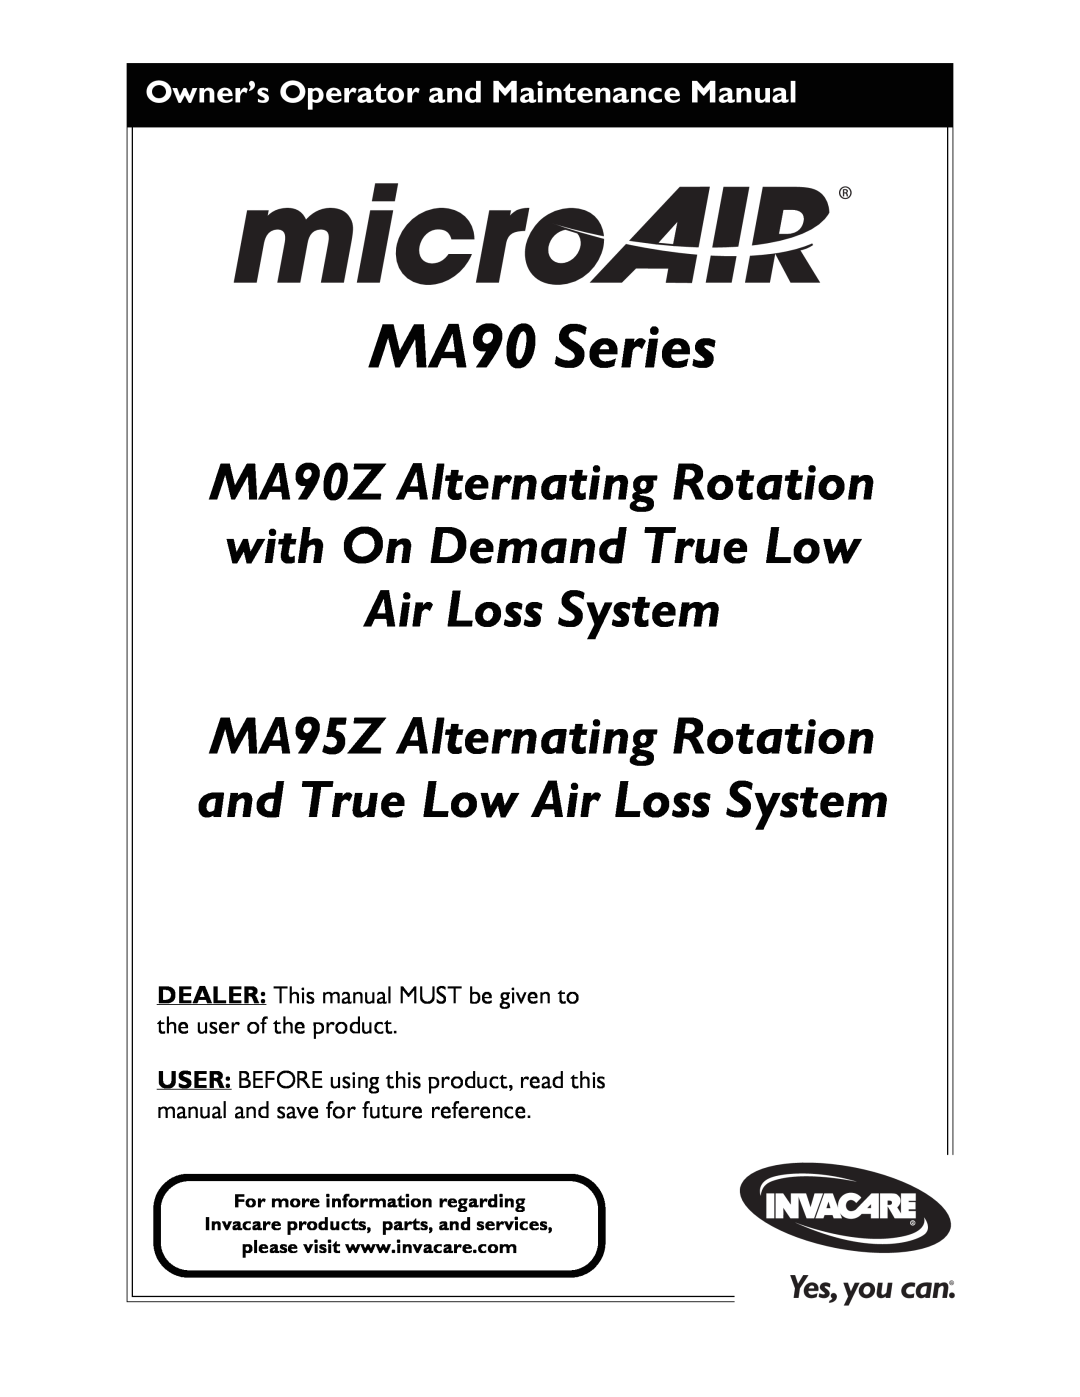 Invacare MA95Z manual MA90 Series, MA90Z Alternating Rotation with On Demand True Low Air Loss System 